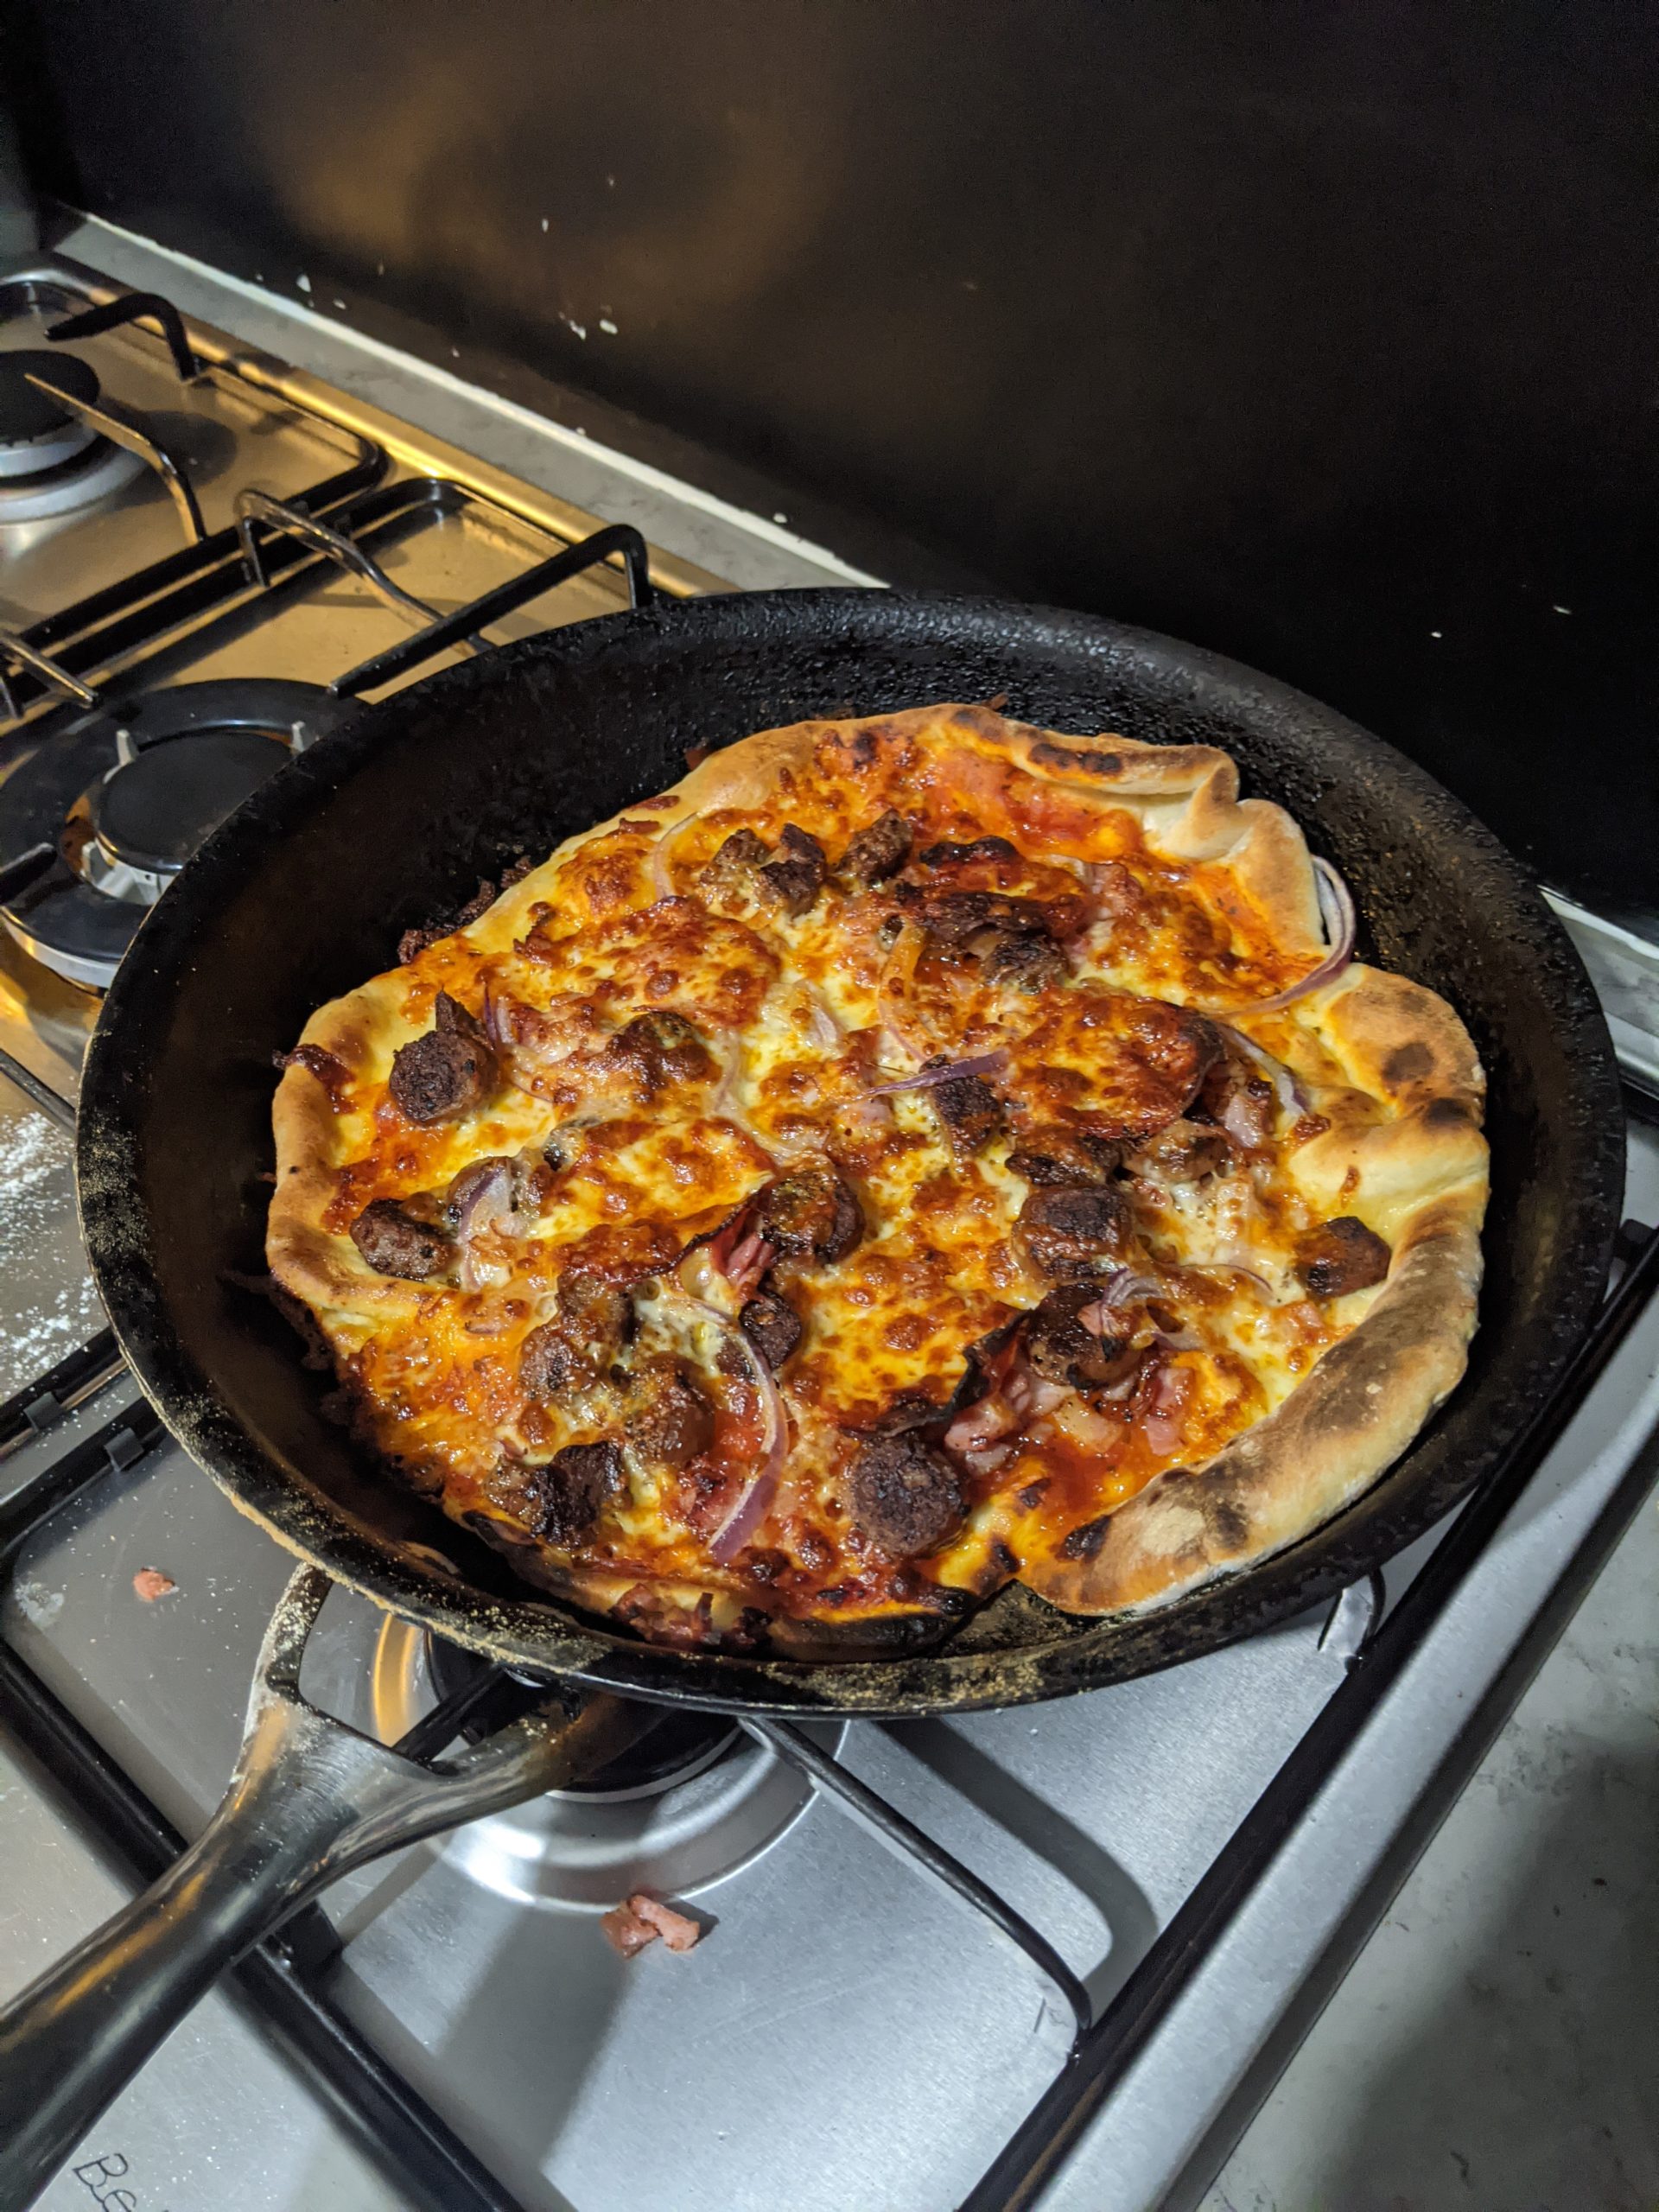 Pan cooked pizza 🍕 1